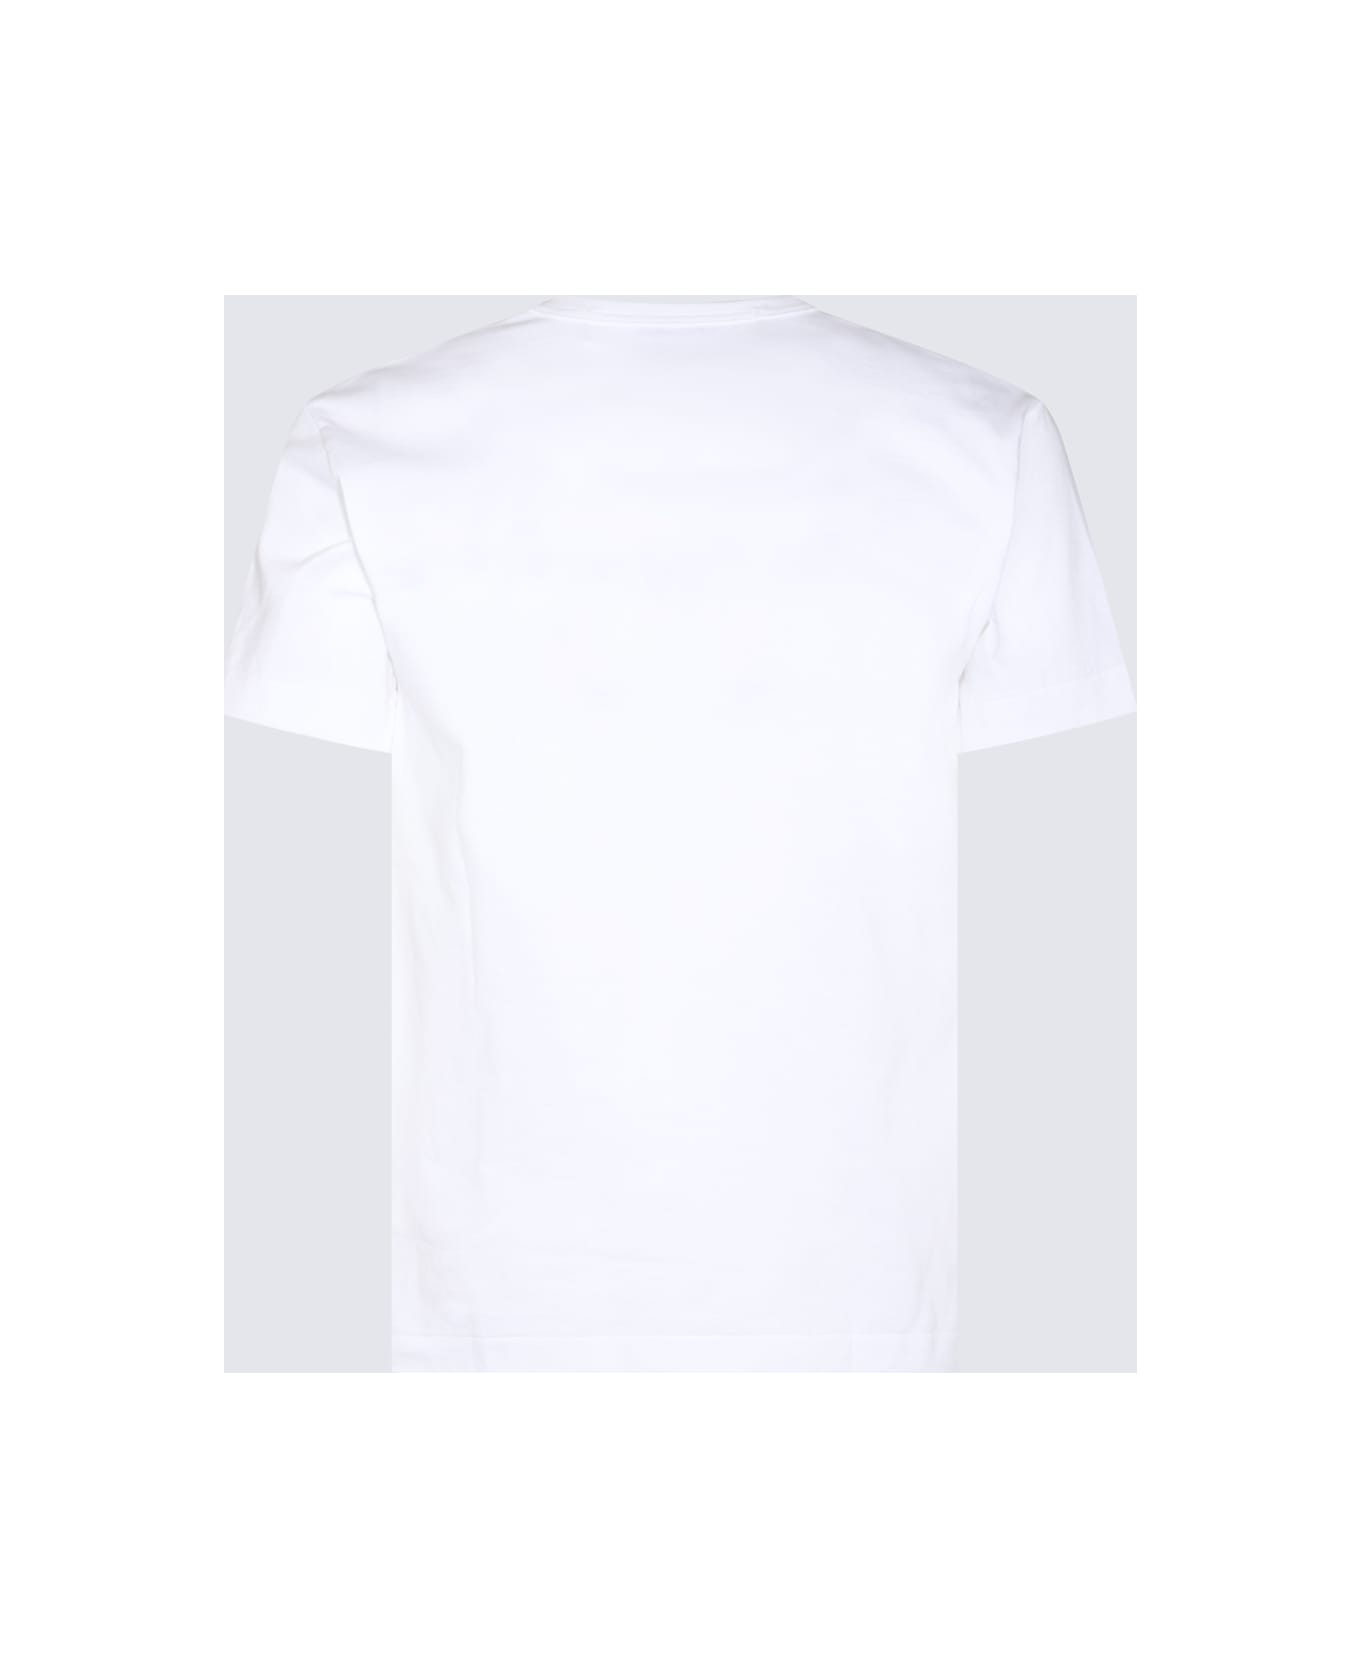 Comme des Garçons Play White And Red Cotton Play T-shirt - White Tシャツ